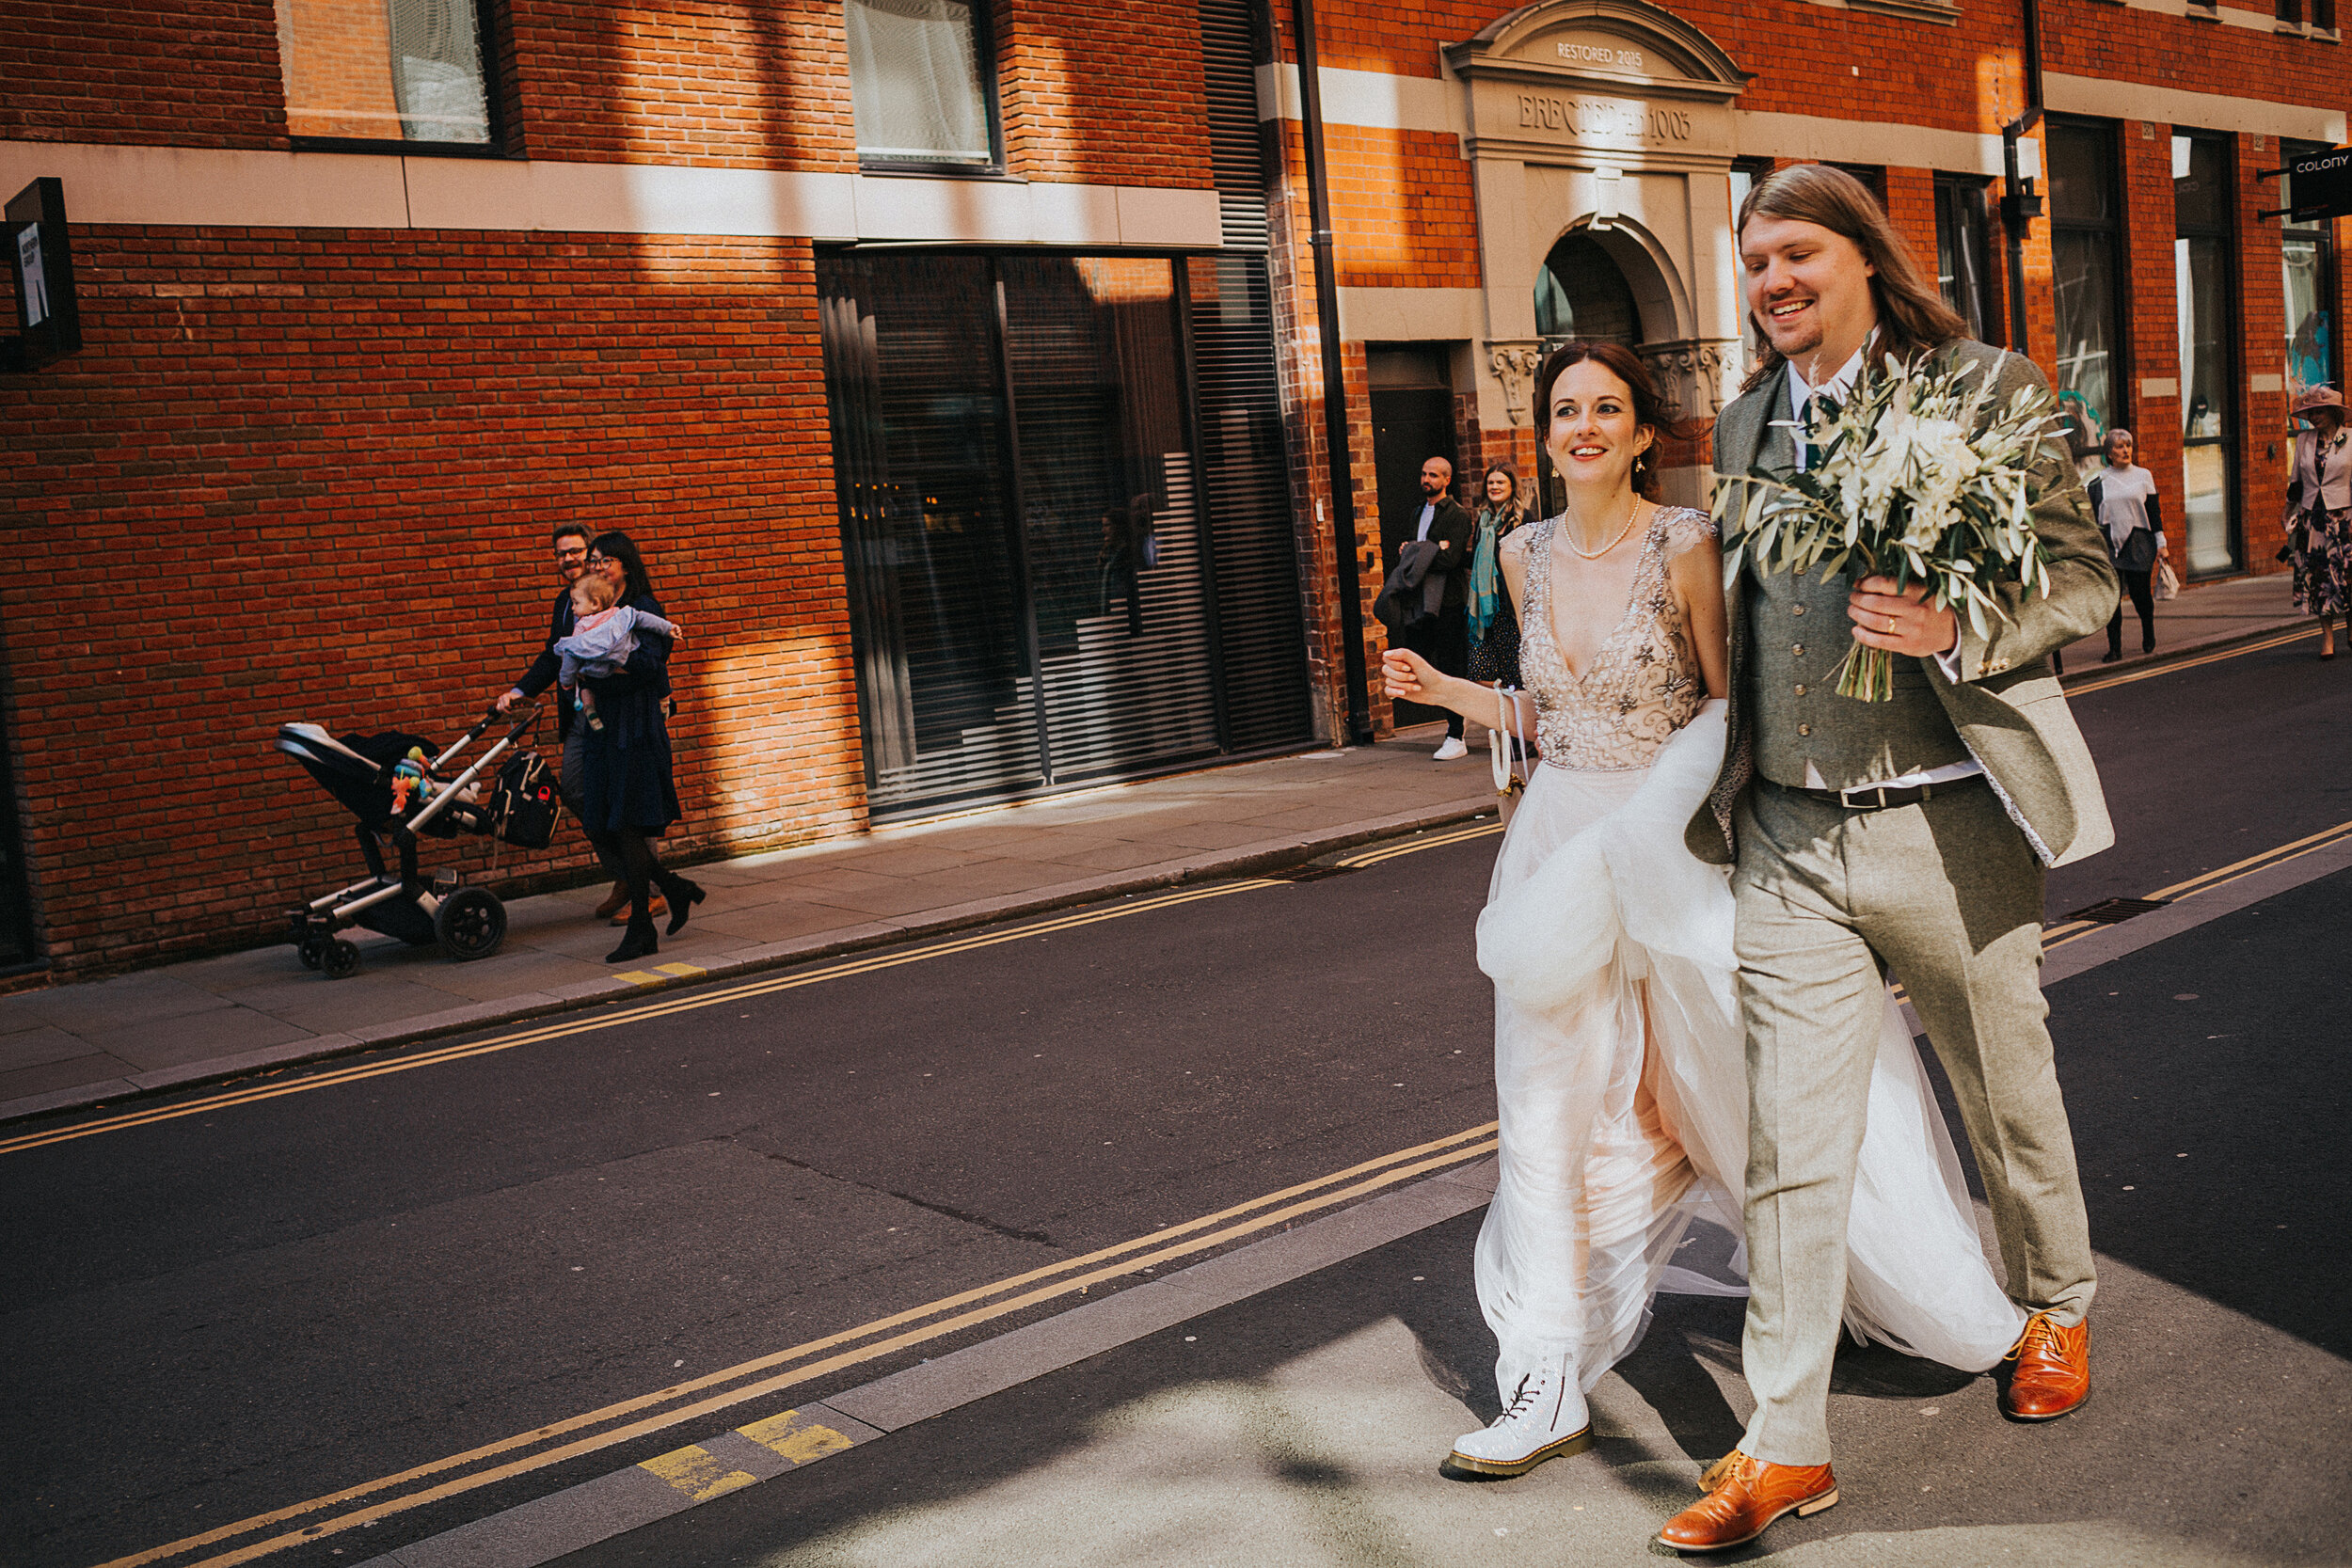 The couple walk with their wedding guests to have a picnic in Manchester City Centre.